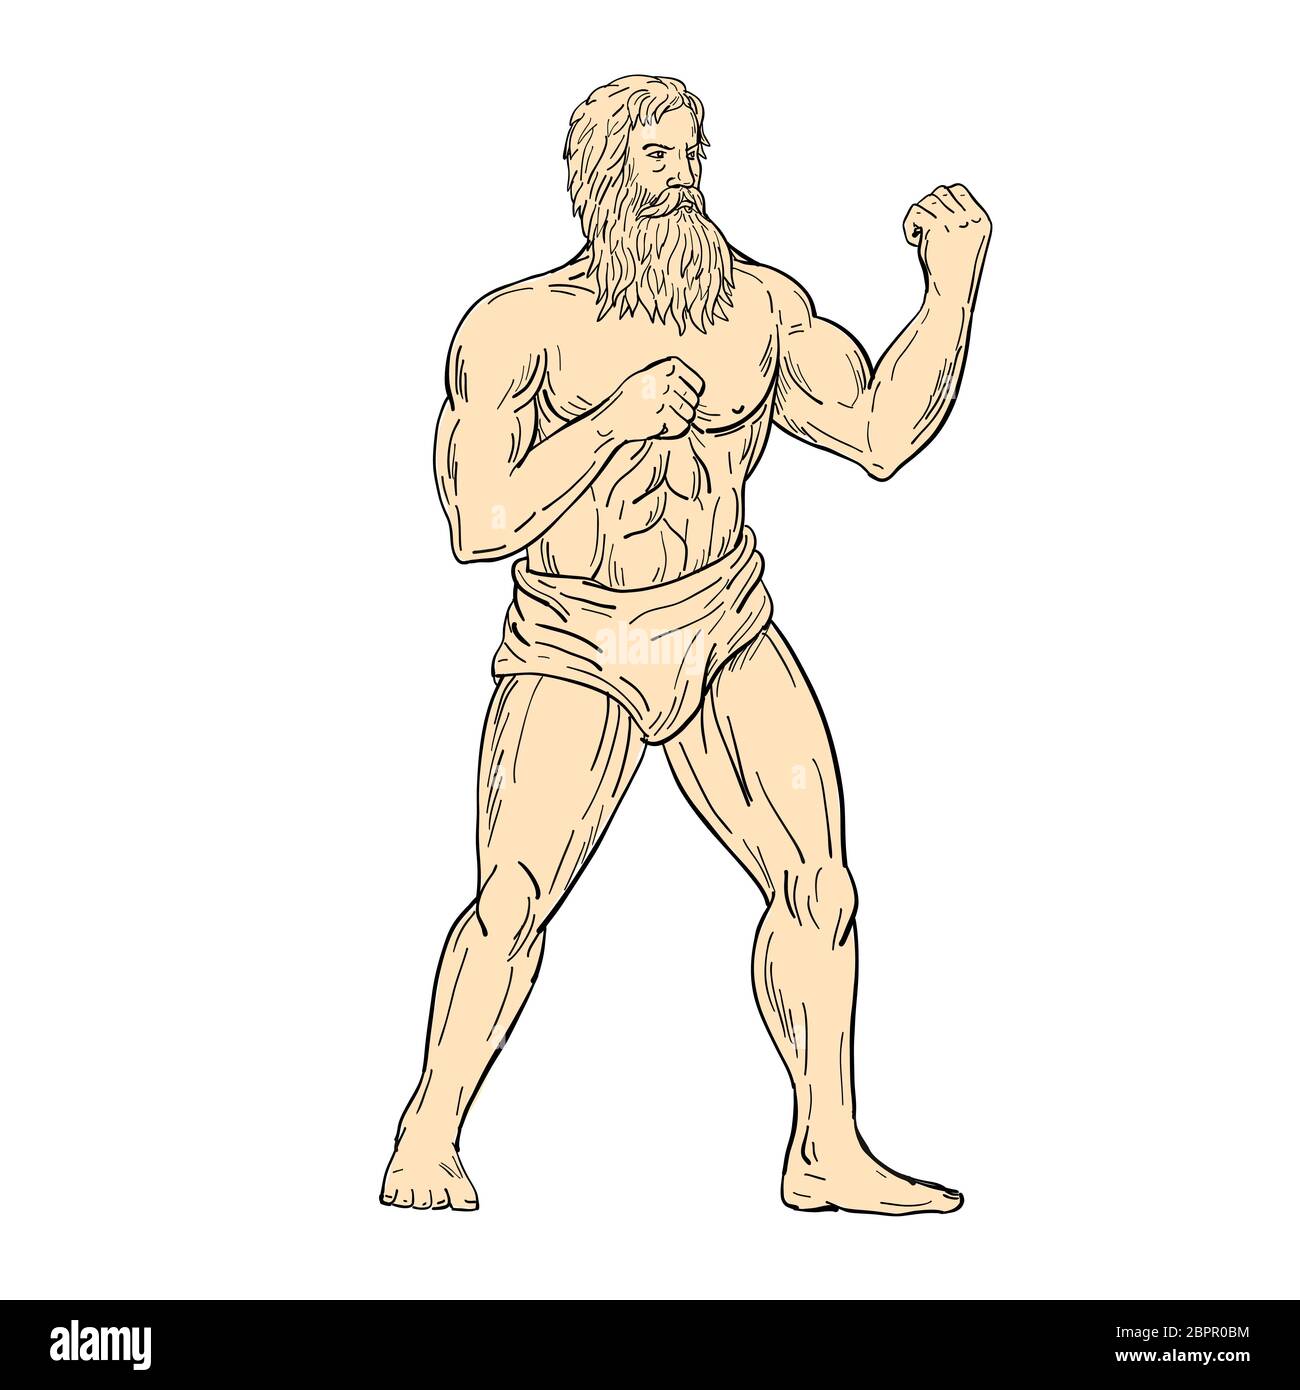 Drawing sketch style illustration of a Hercules, a Roman hero and god, with fists on chest ready to fight in boxer boxing fighting stance on isolated Stock Photo